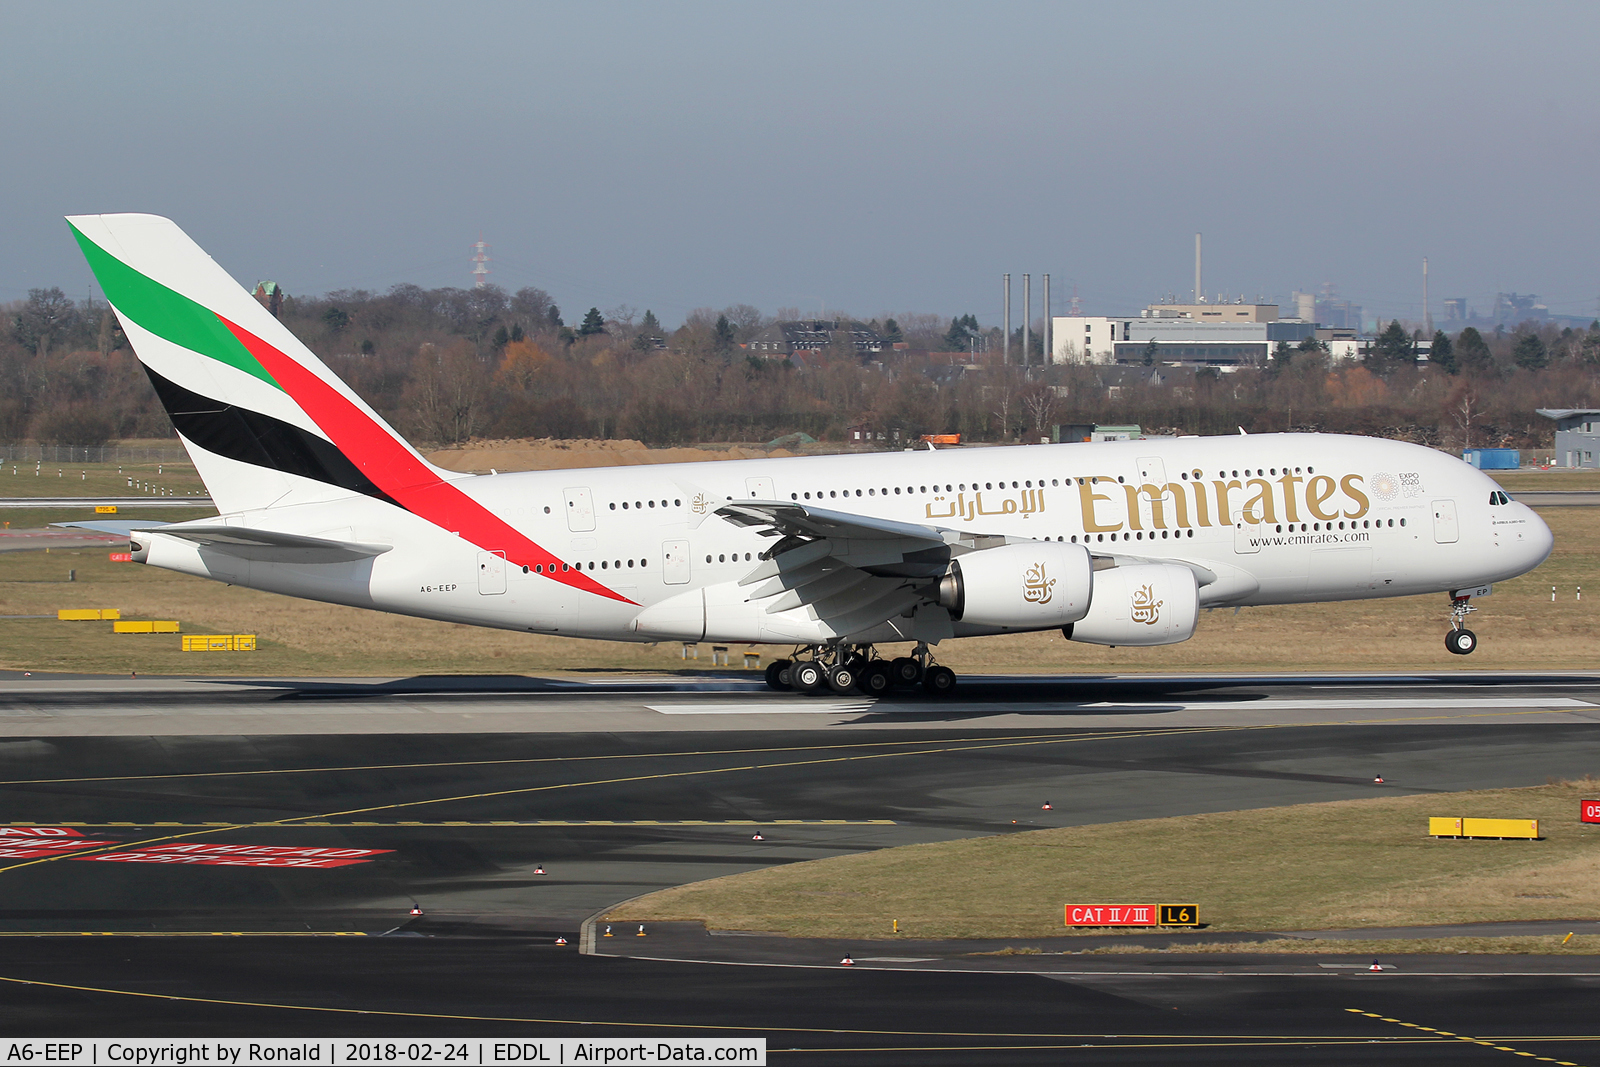 A6-EEP, 2013 Airbus A380-861 C/N 138, at dus